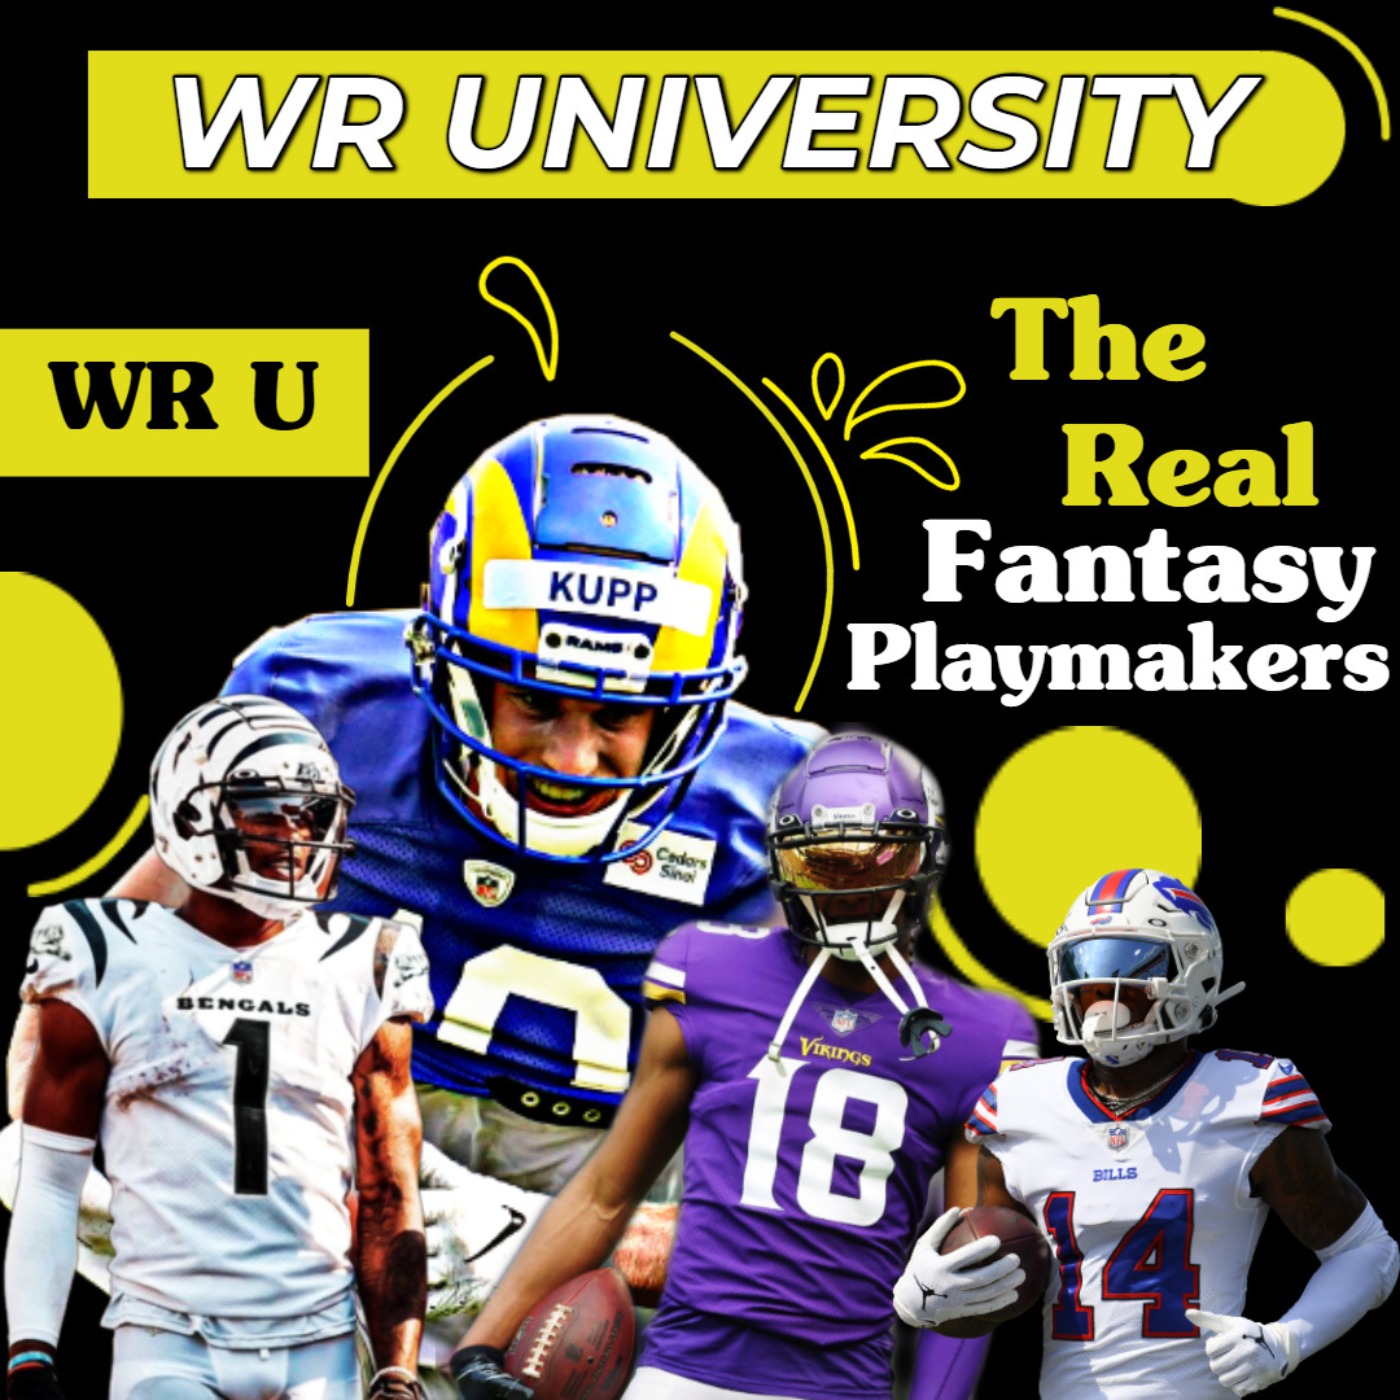 WR University | Fantasy Football What's More Likely? Image